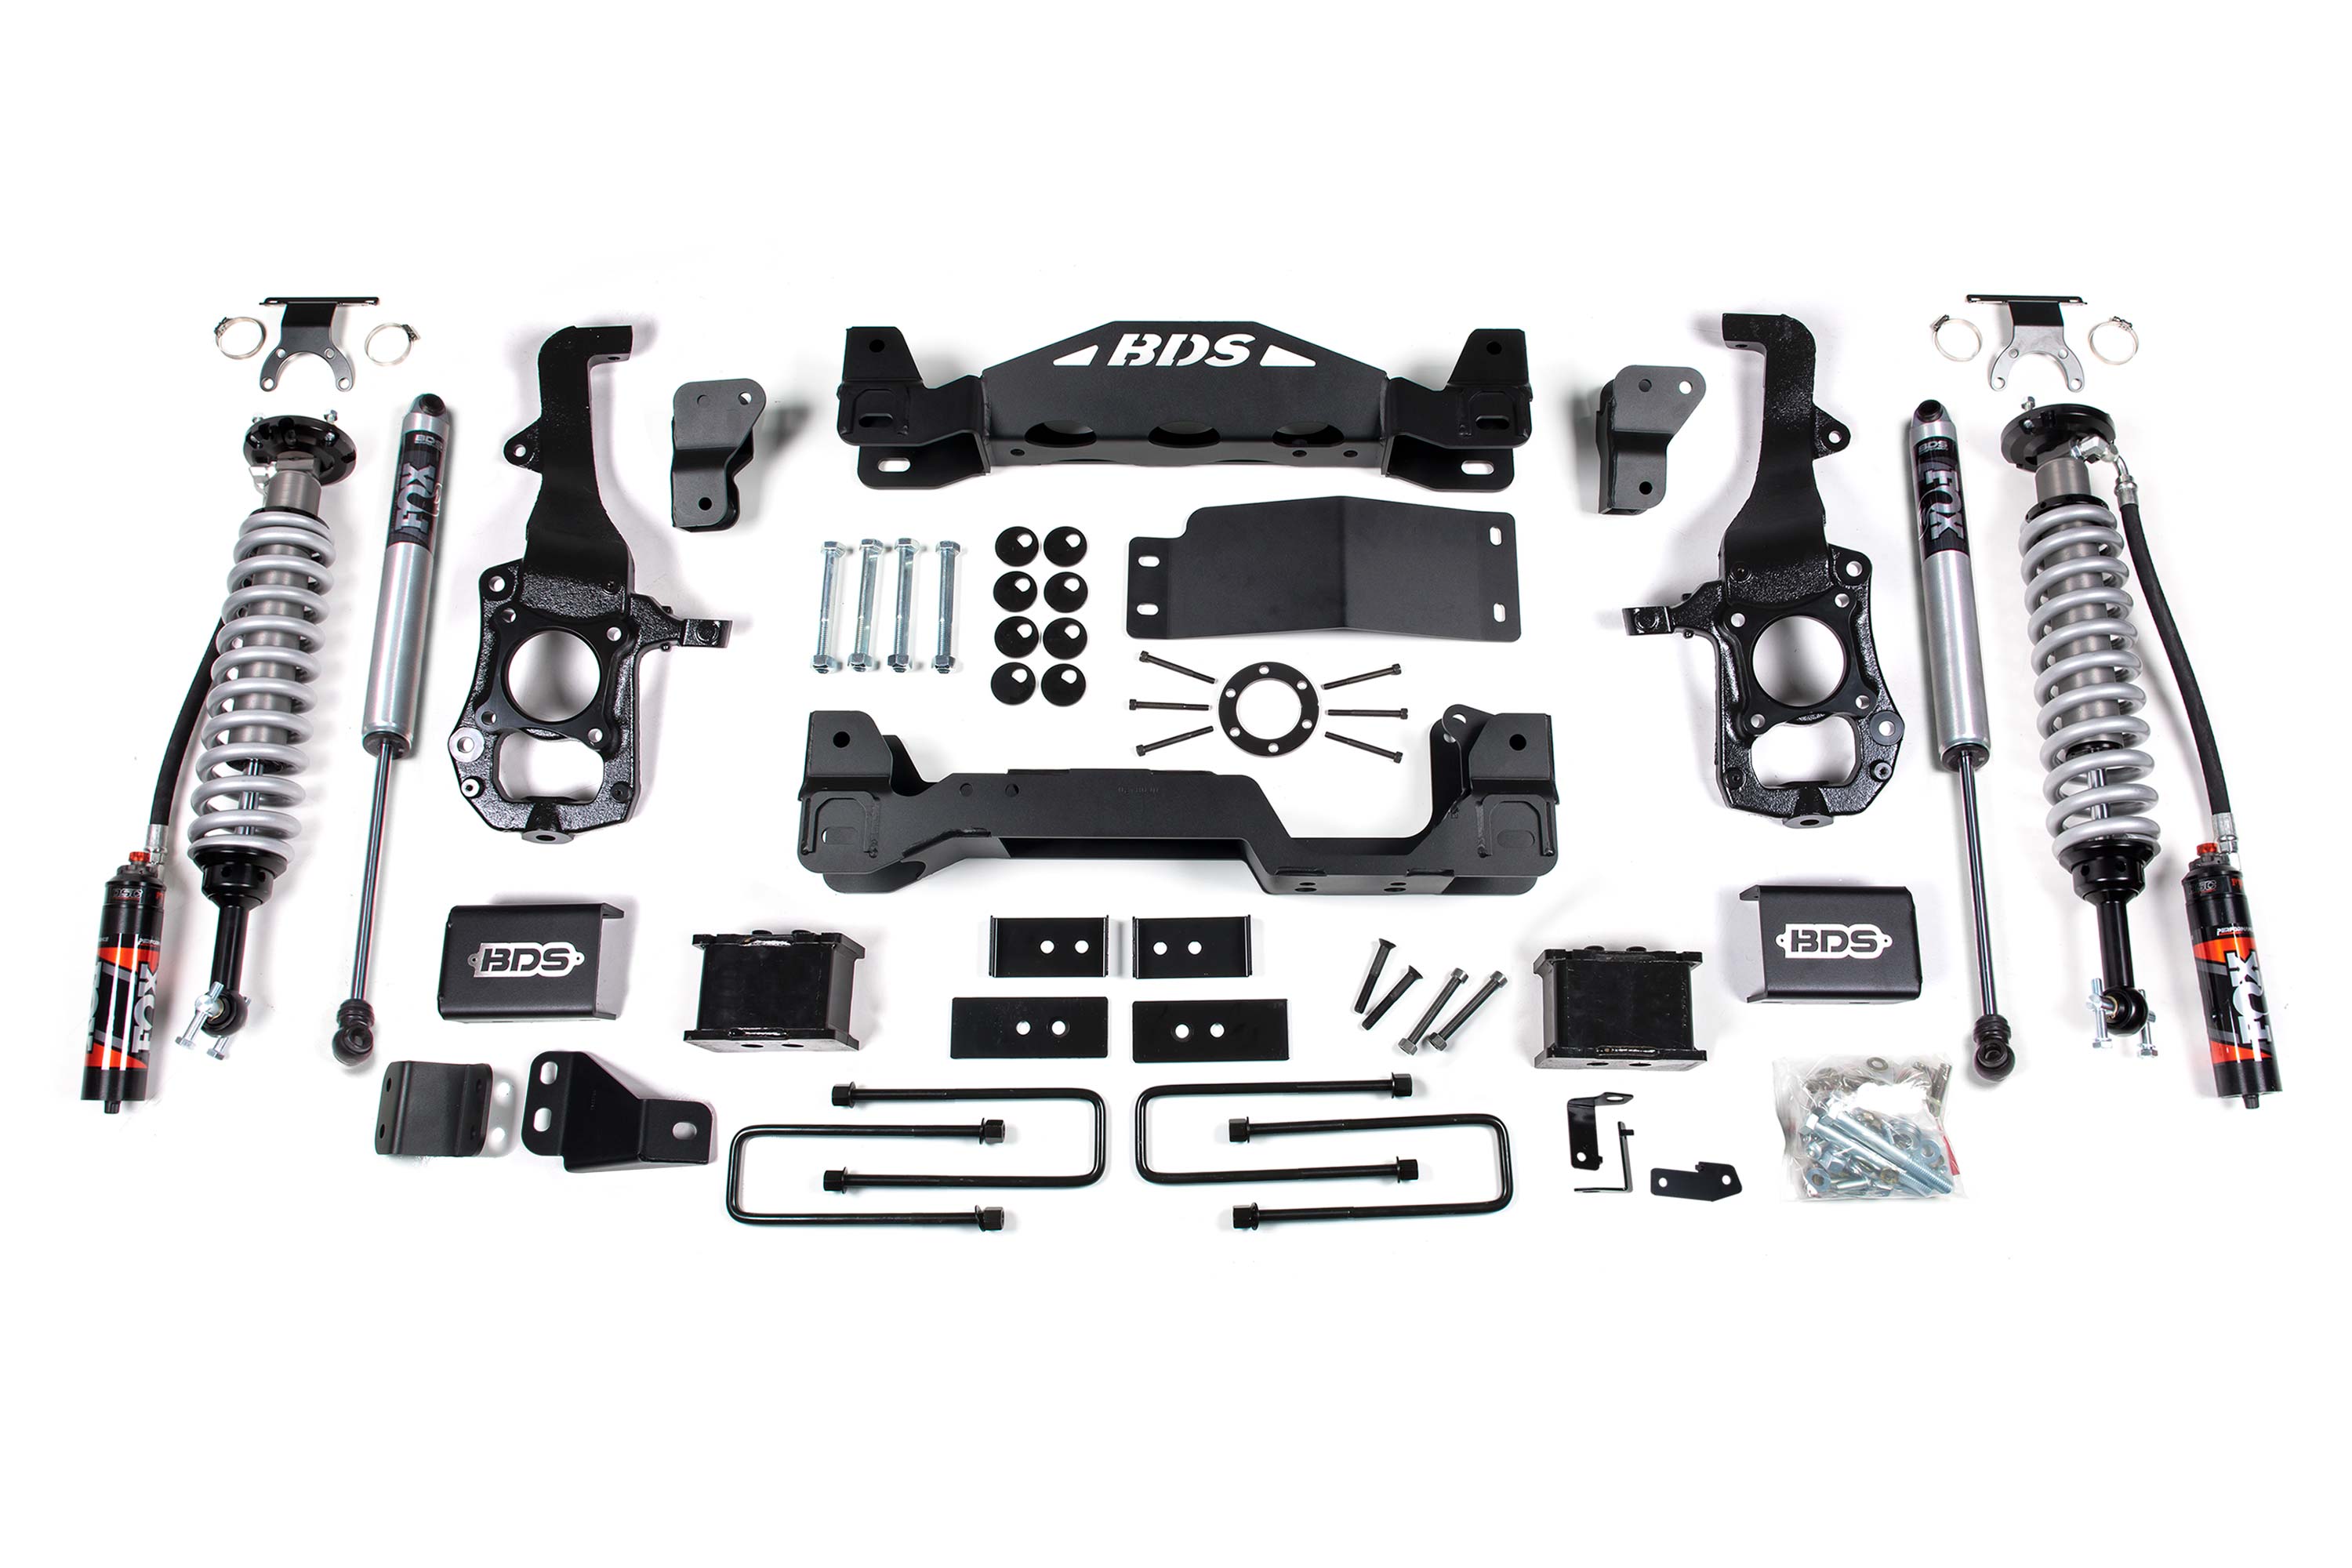 BDS 6" Lift Kit for 2021+ Ford F150 with Fox 2.5 Performance Elite Shocks - Outback Kitters